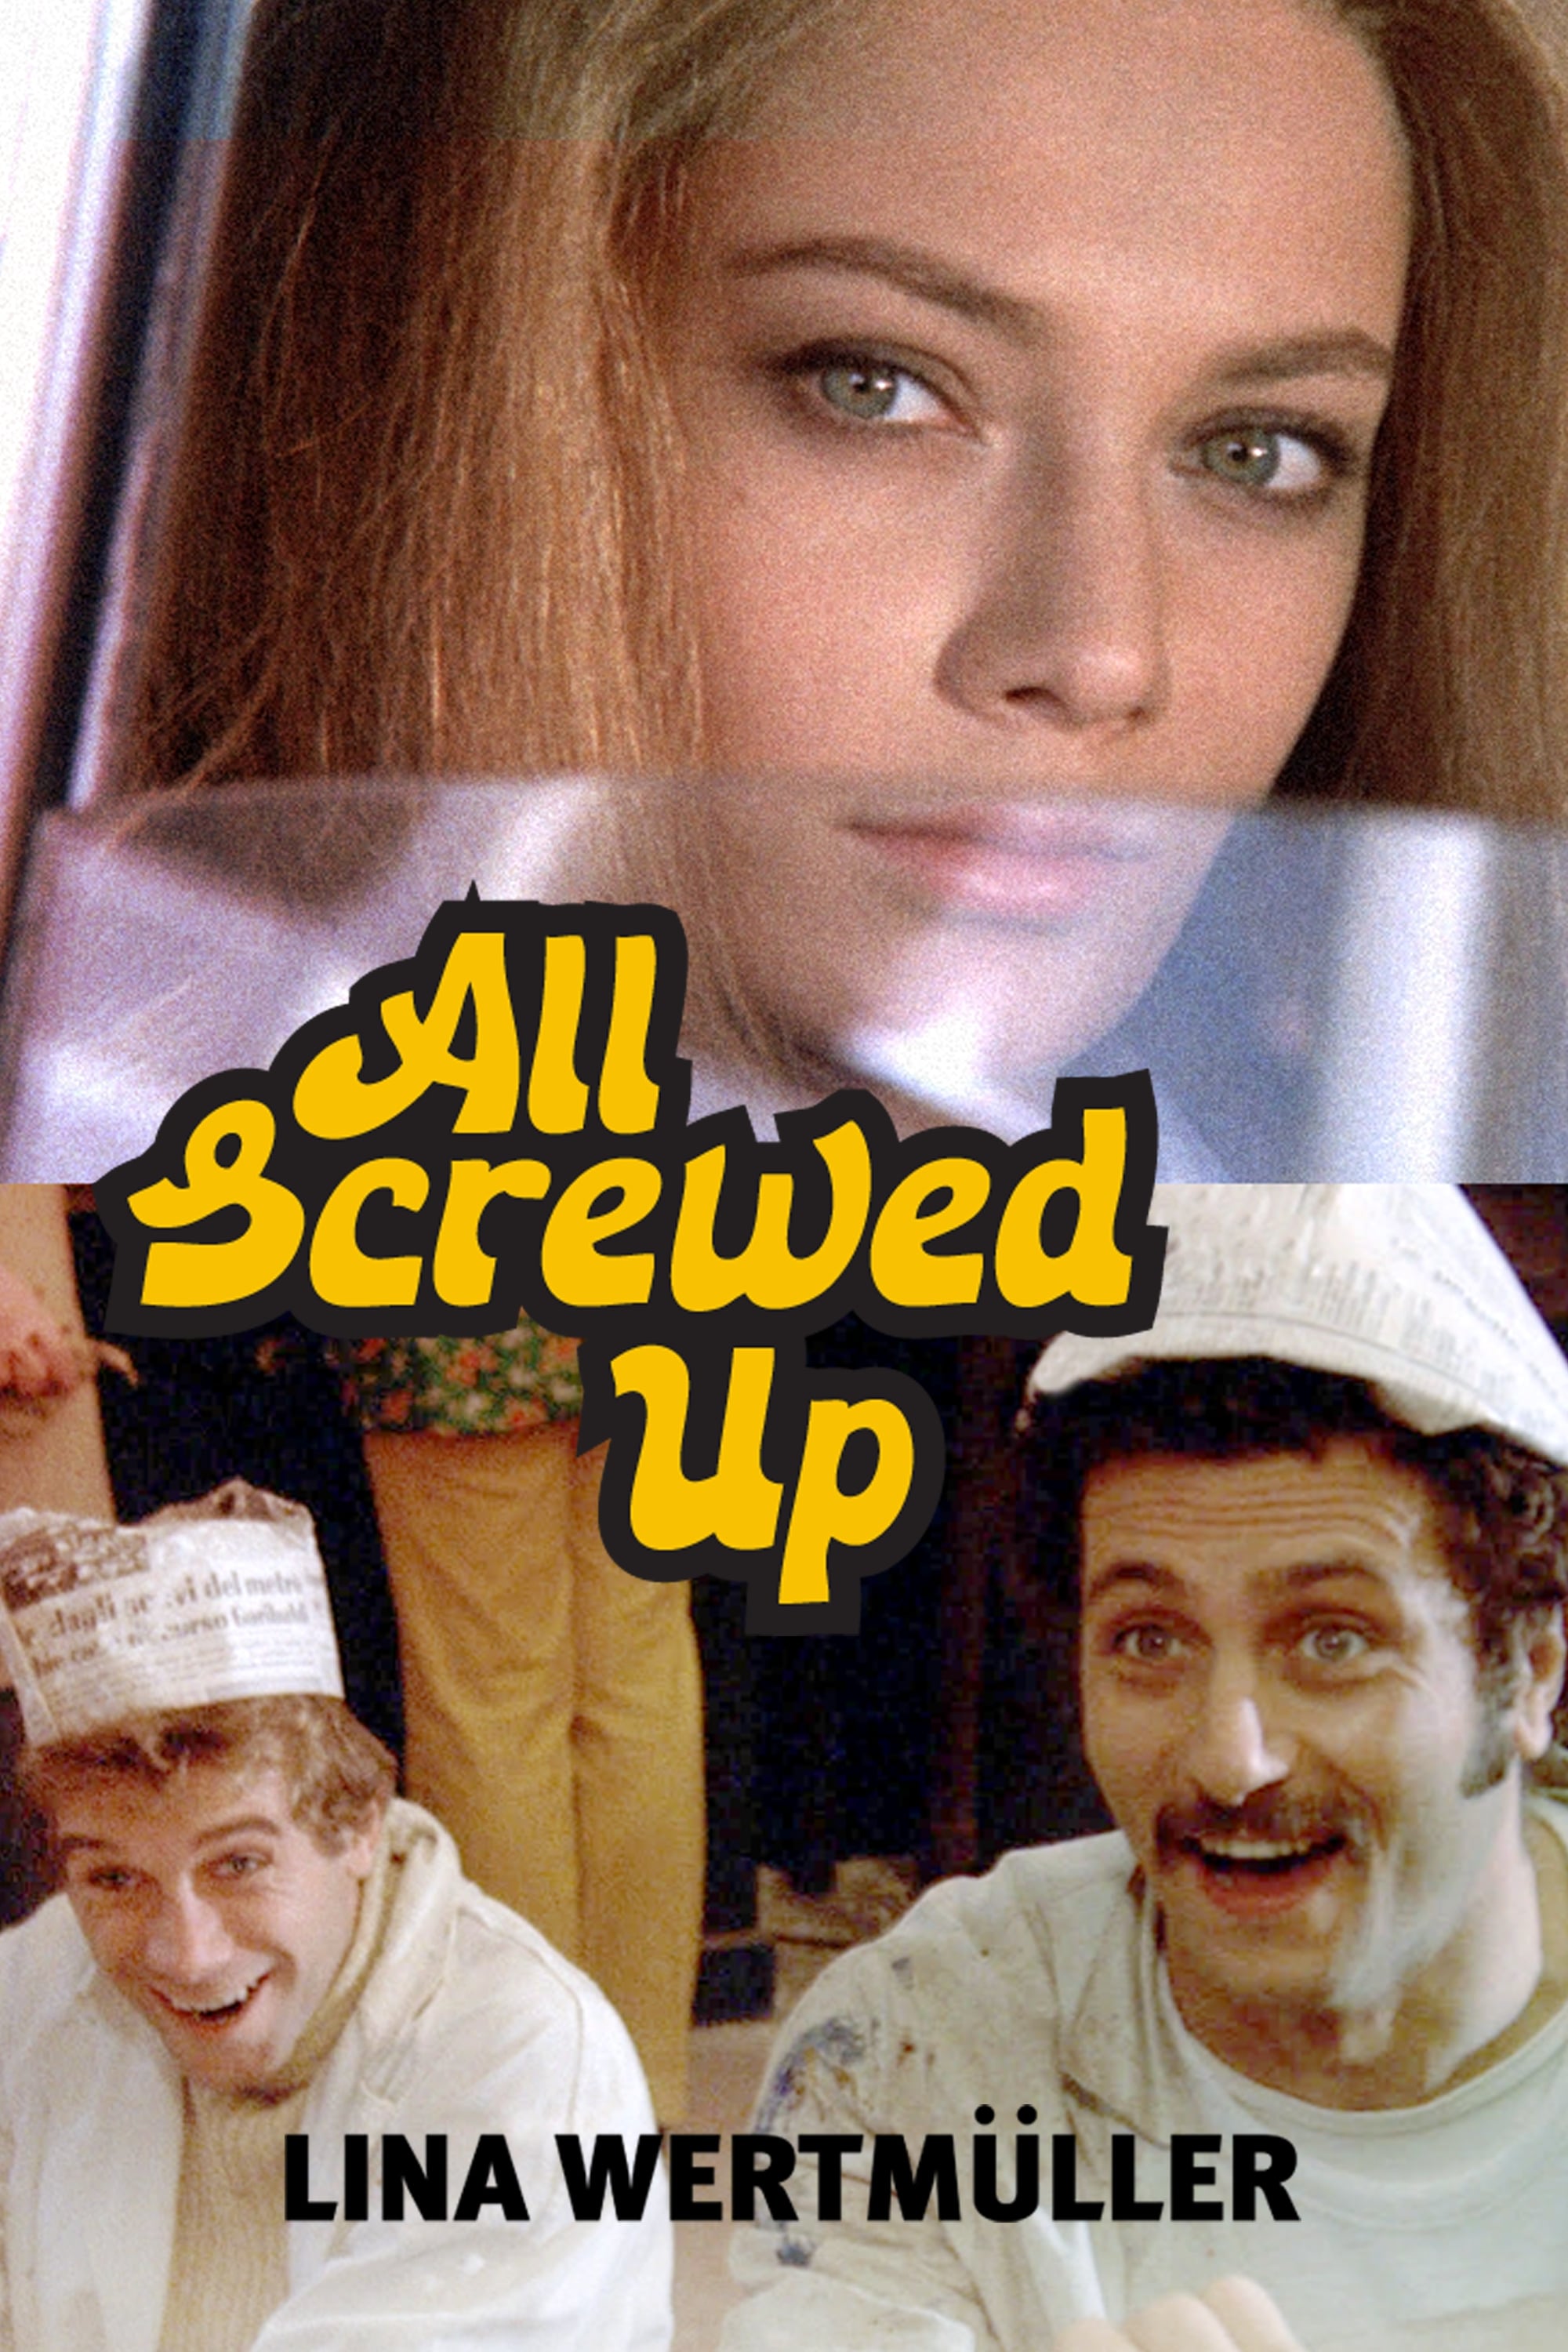 all screwed up film